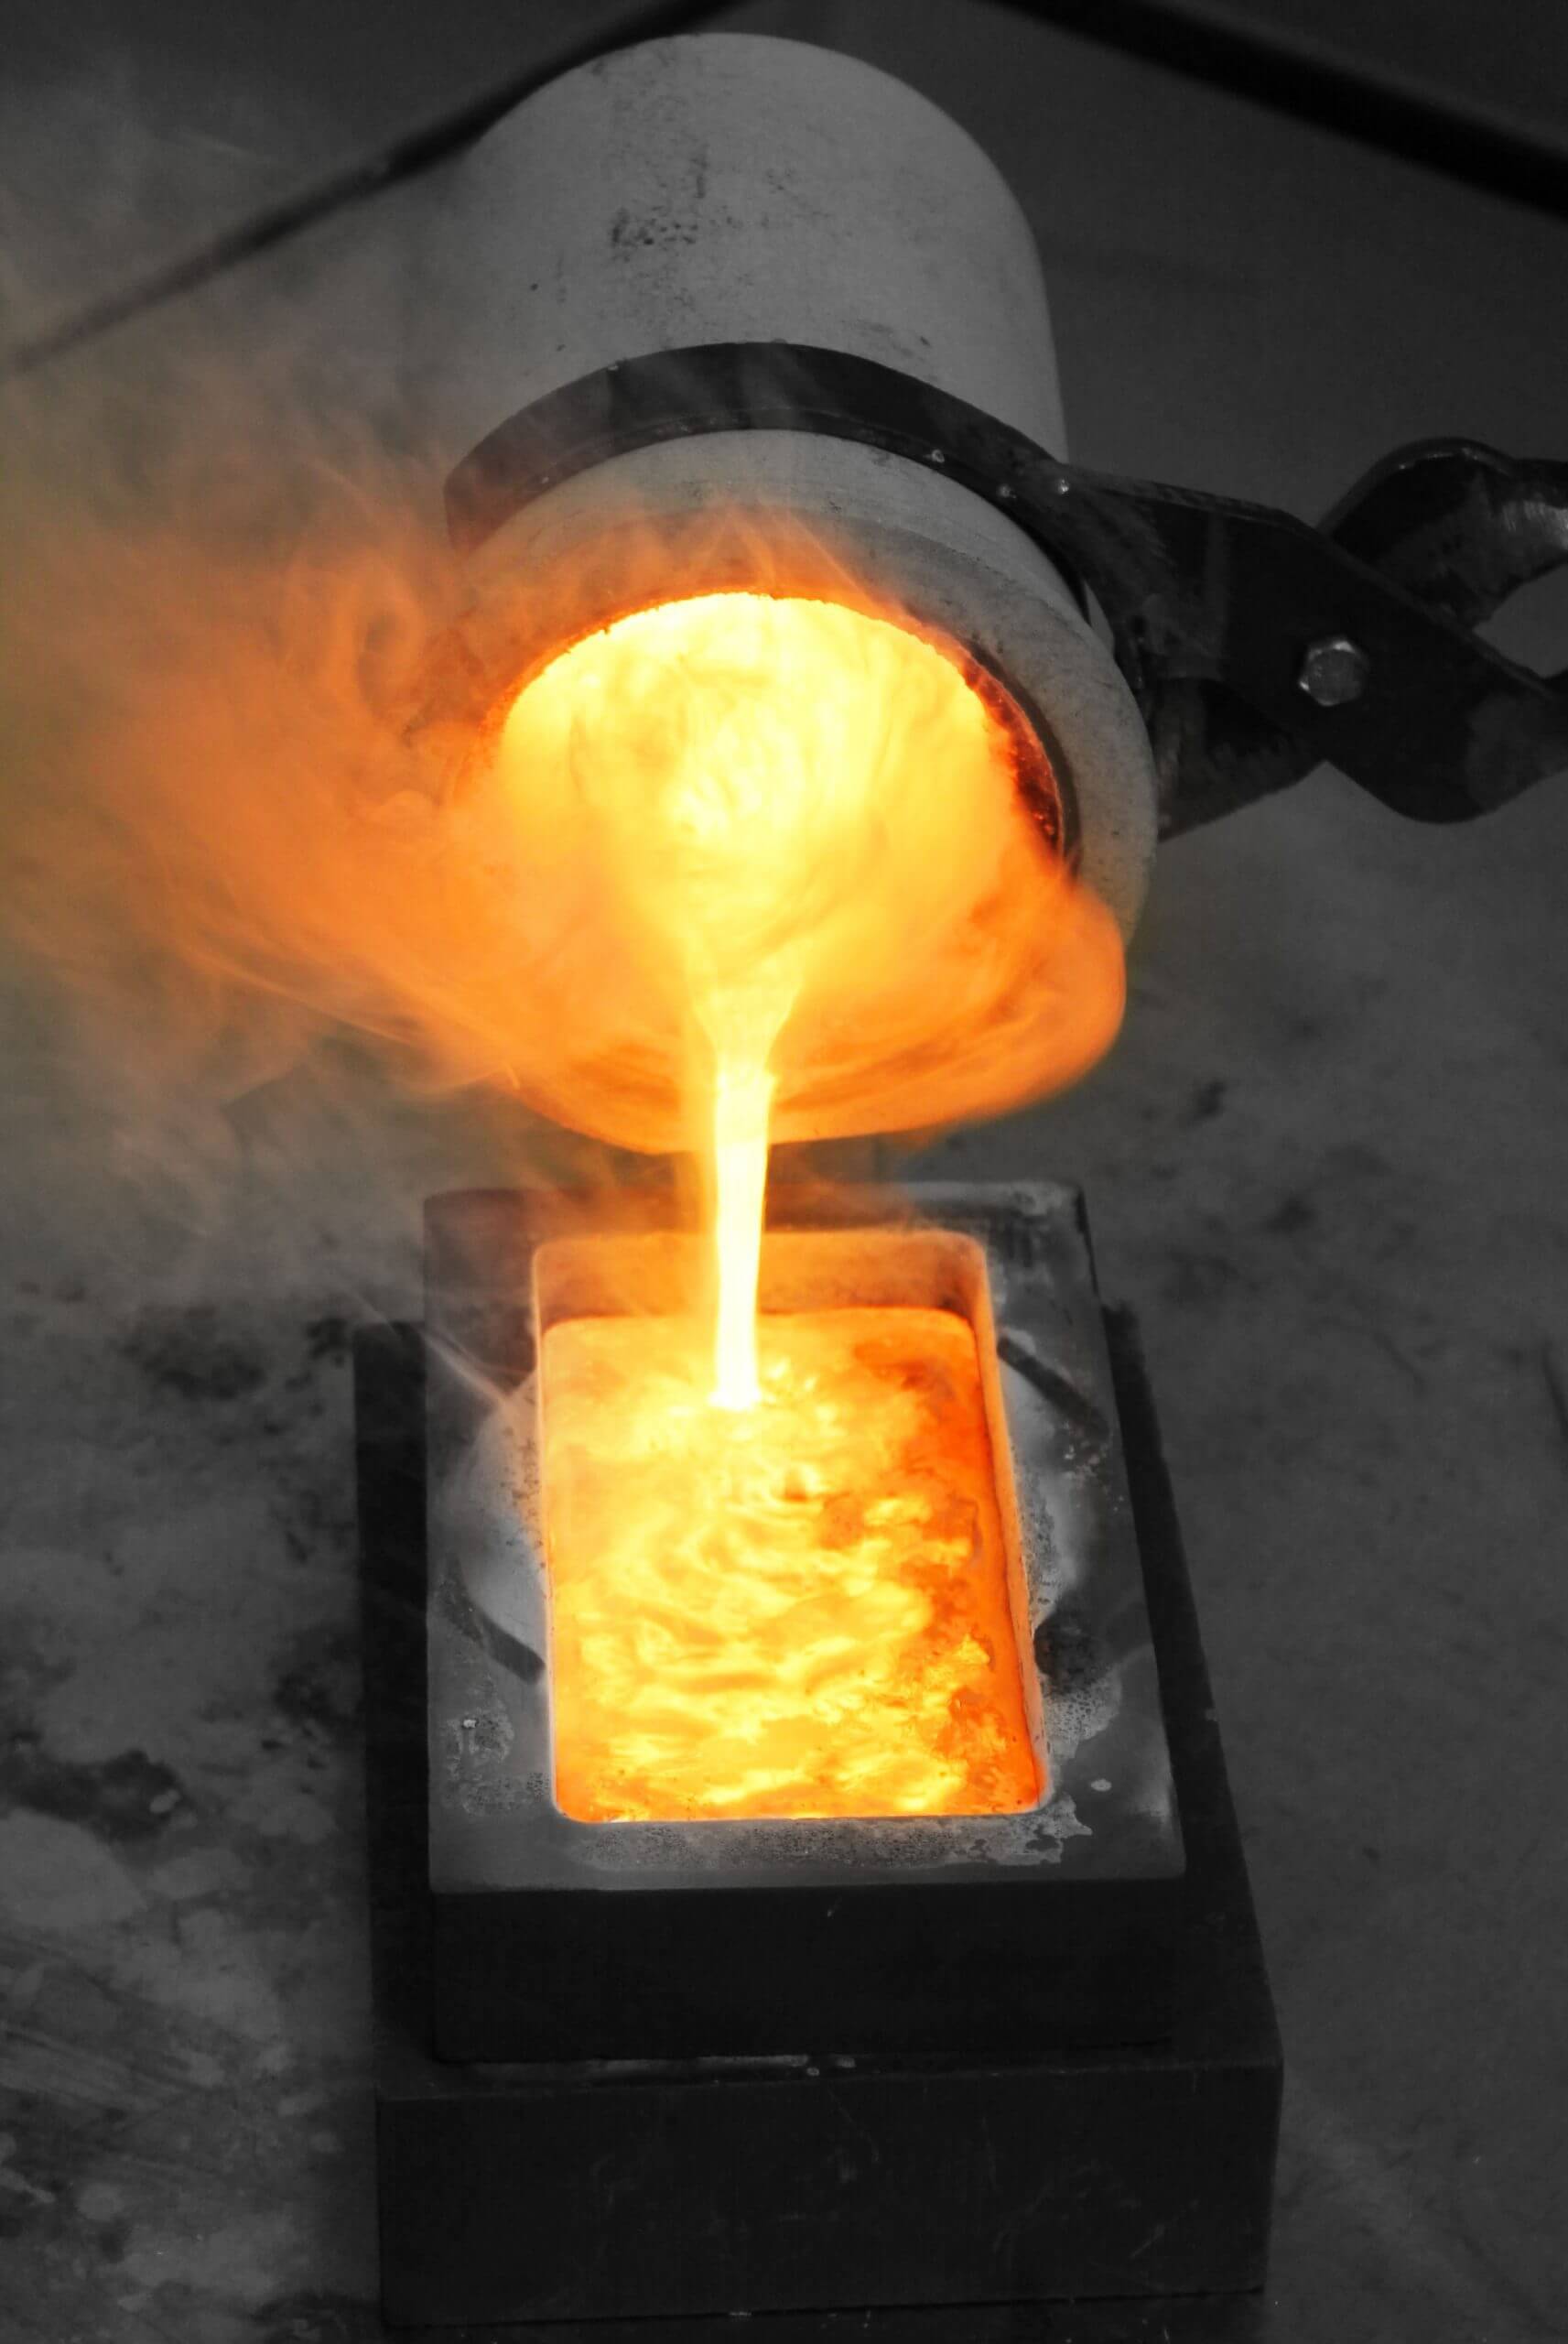 We pour liquid gold from the crucible into the mold to form a gold bar